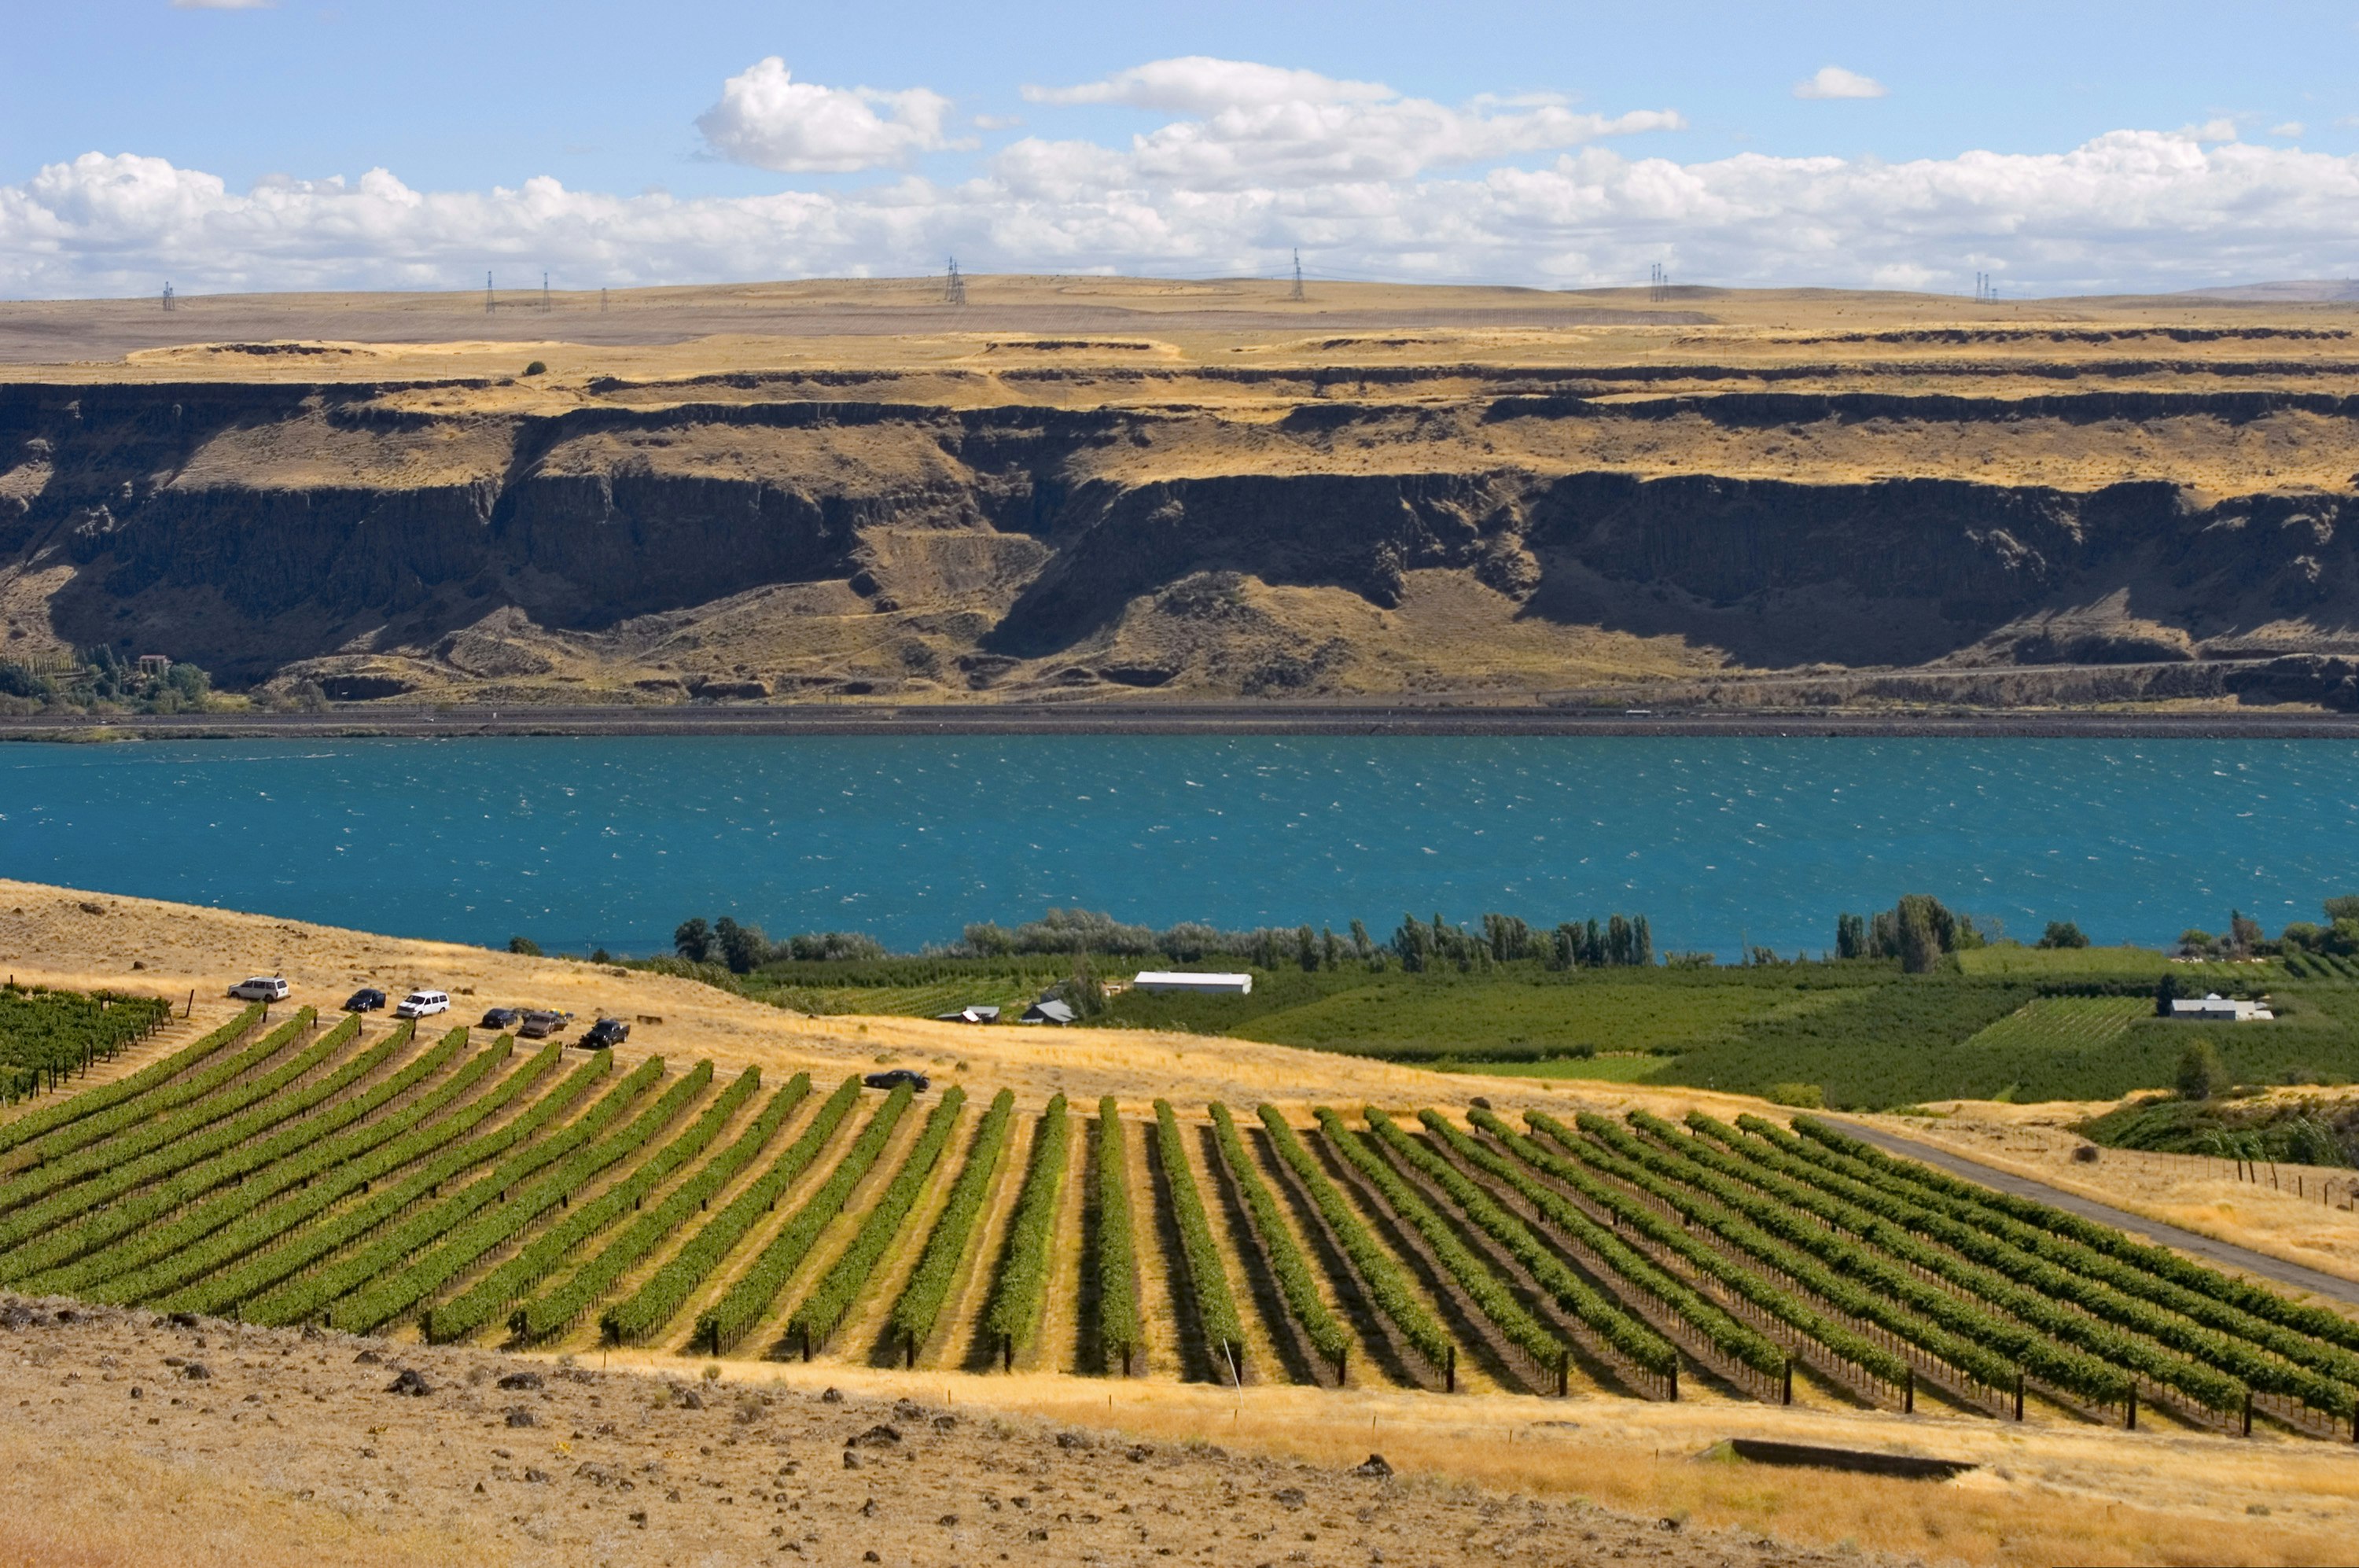 The bright cerulean blue stripe of the Columbia River forms the middle ground of this photo, while the foreground is made up of bright tan grasslands interrupted by green rows of grape vines running perpendicular to the river. In the background are the high bluffs on the opposite Oregon bank.